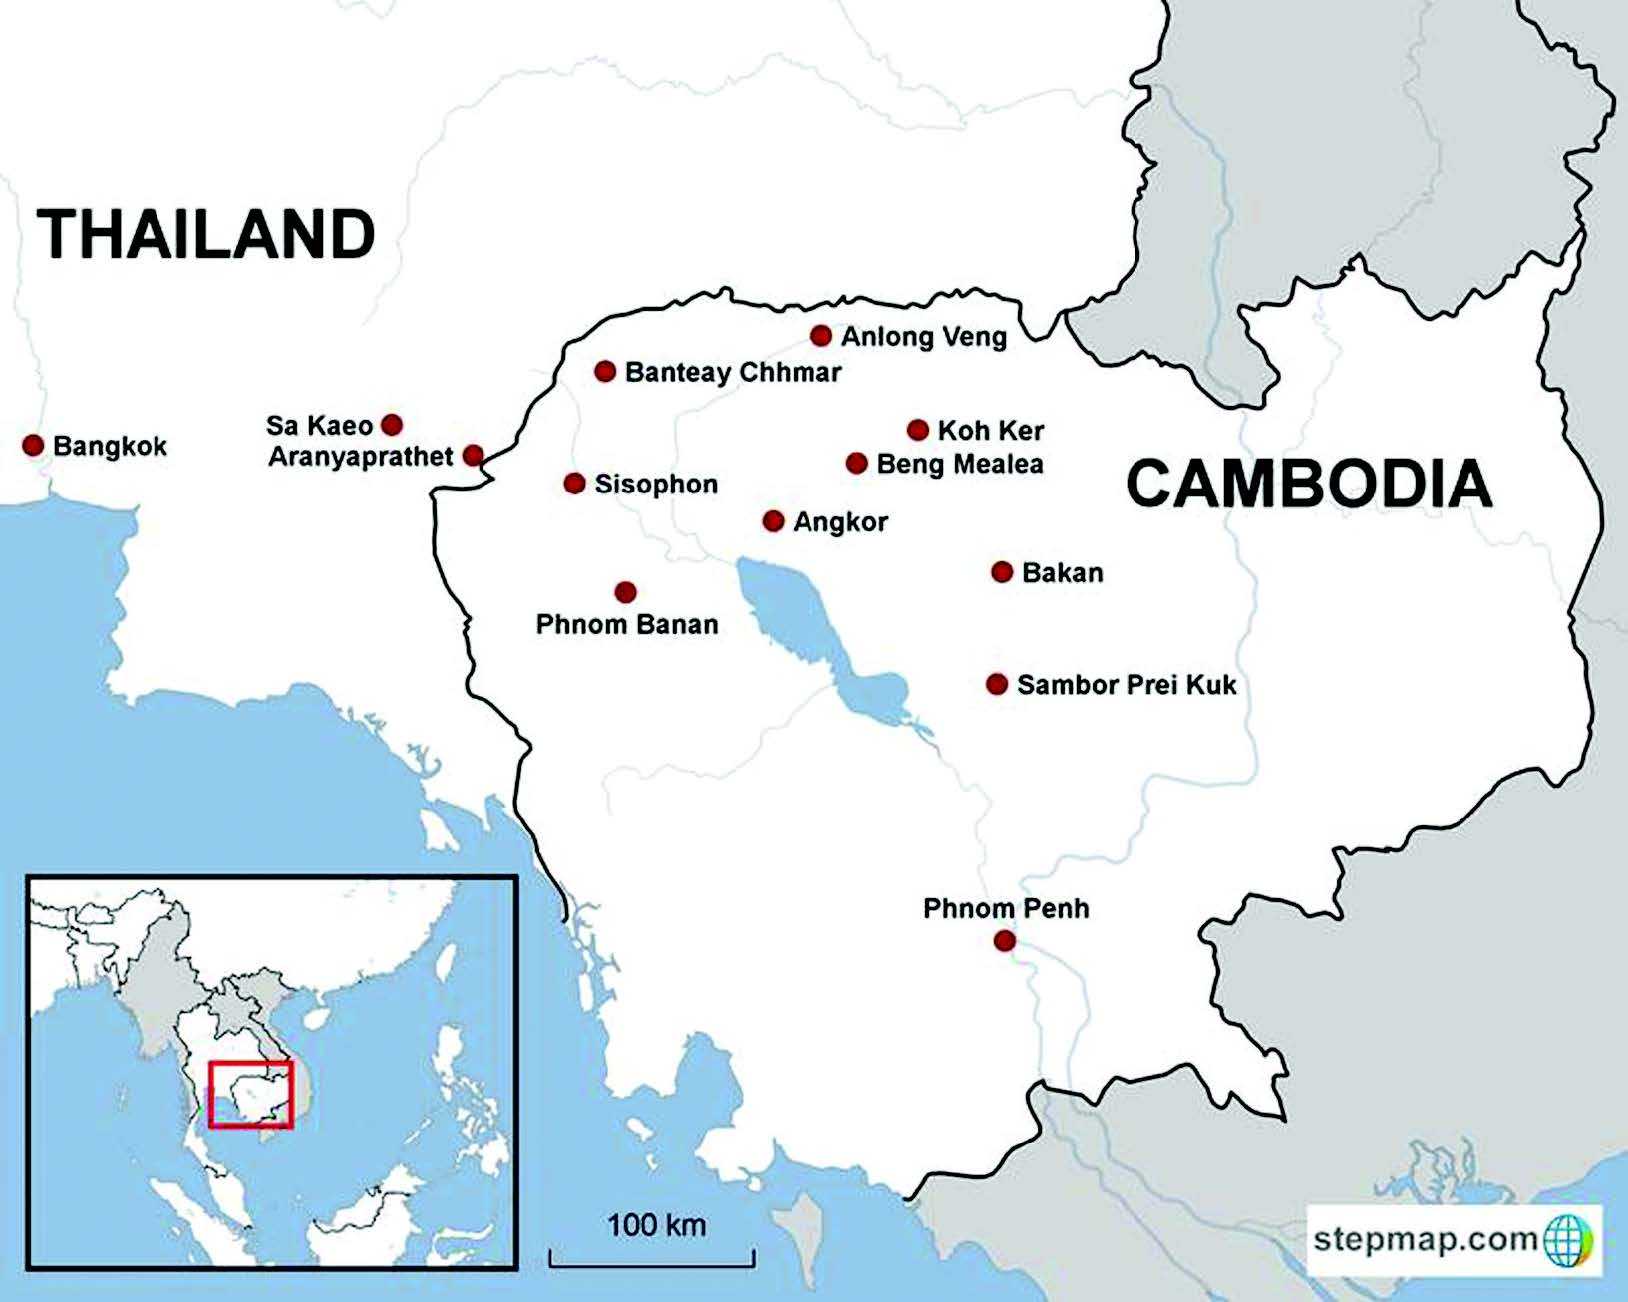 2014-BJC-Temple-Looting-in-Cambodia-map-visited-sites.jpg#asset:7111